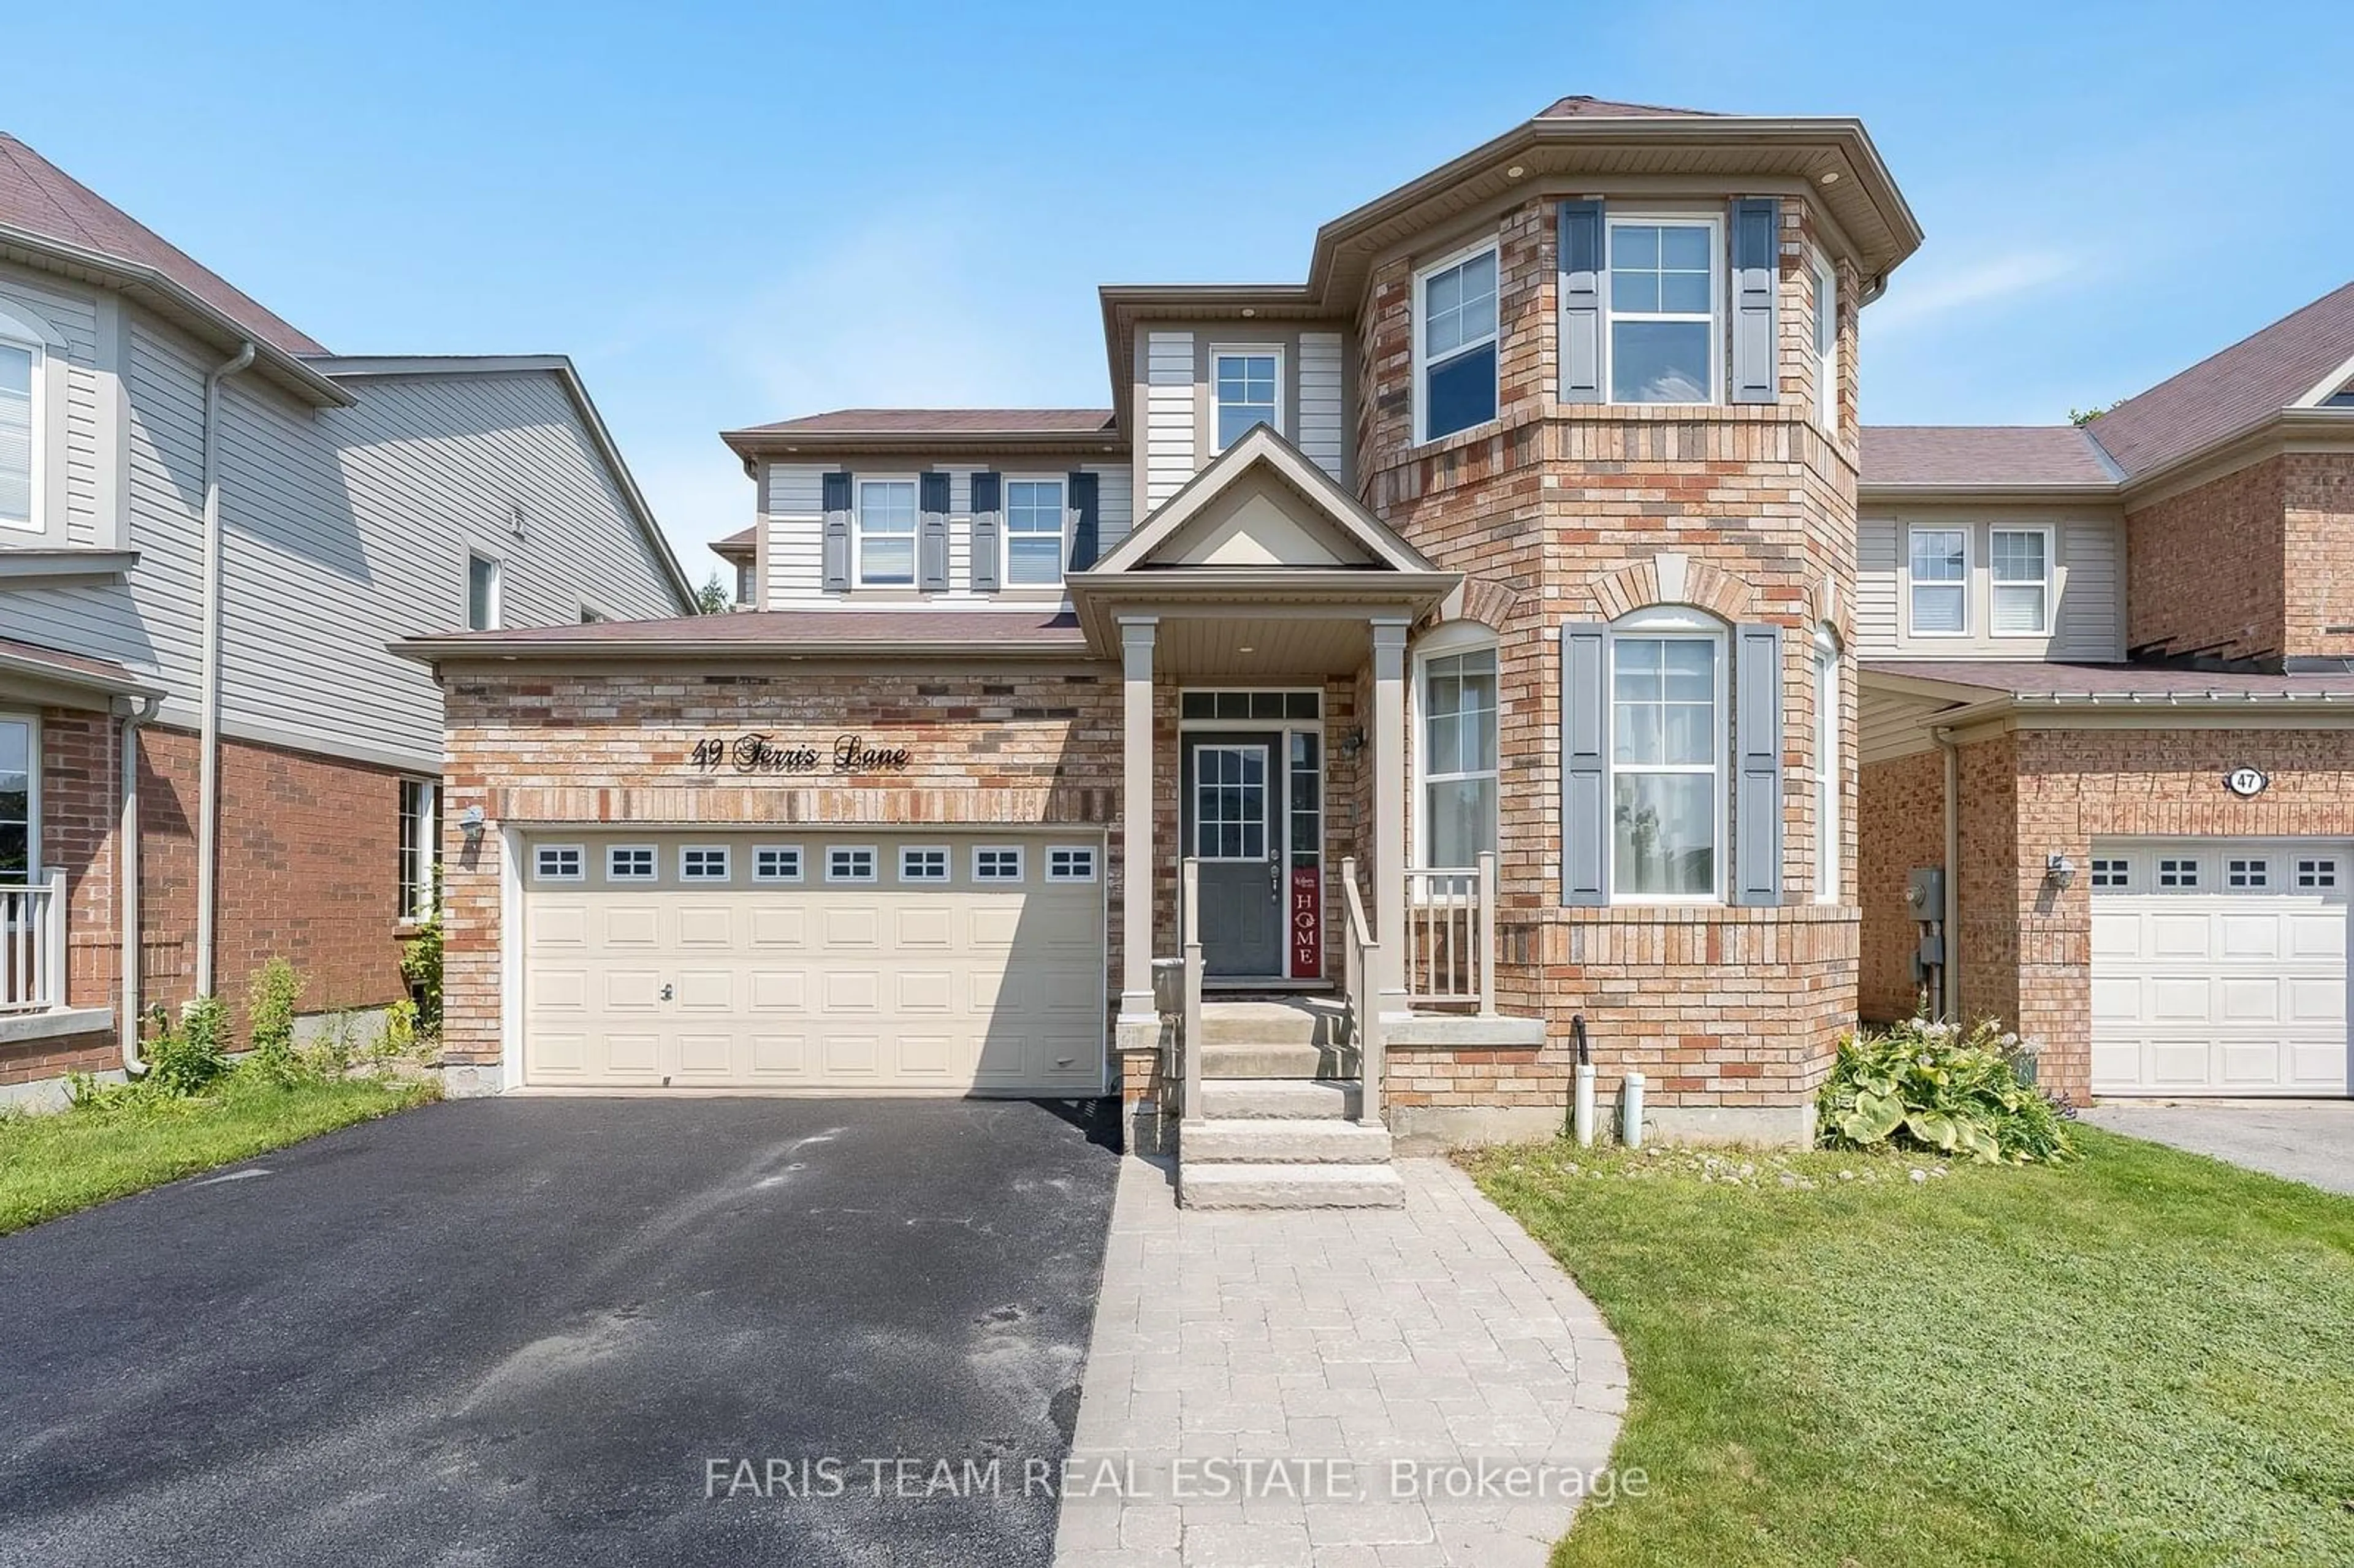 Frontside or backside of a home for 49 Ferris Lane, New Tecumseth Ontario L9R 0J3